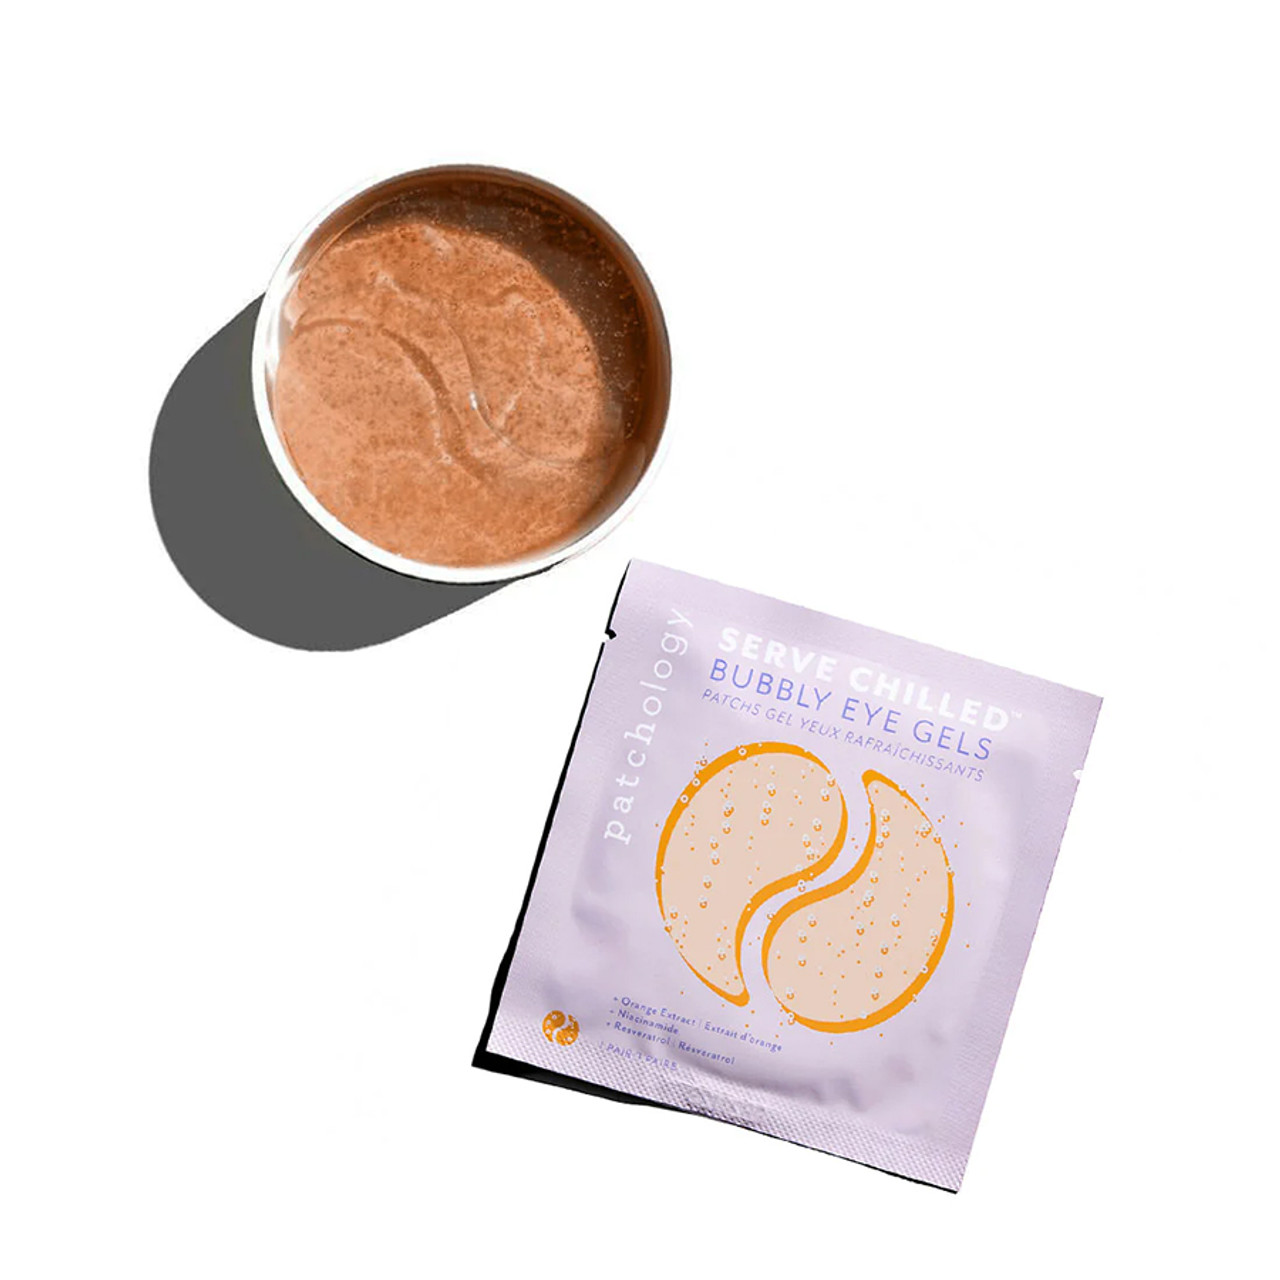 Patchology Serve Chilled Bubbly Brightening Eye Gels - Skin Dimensions  Online